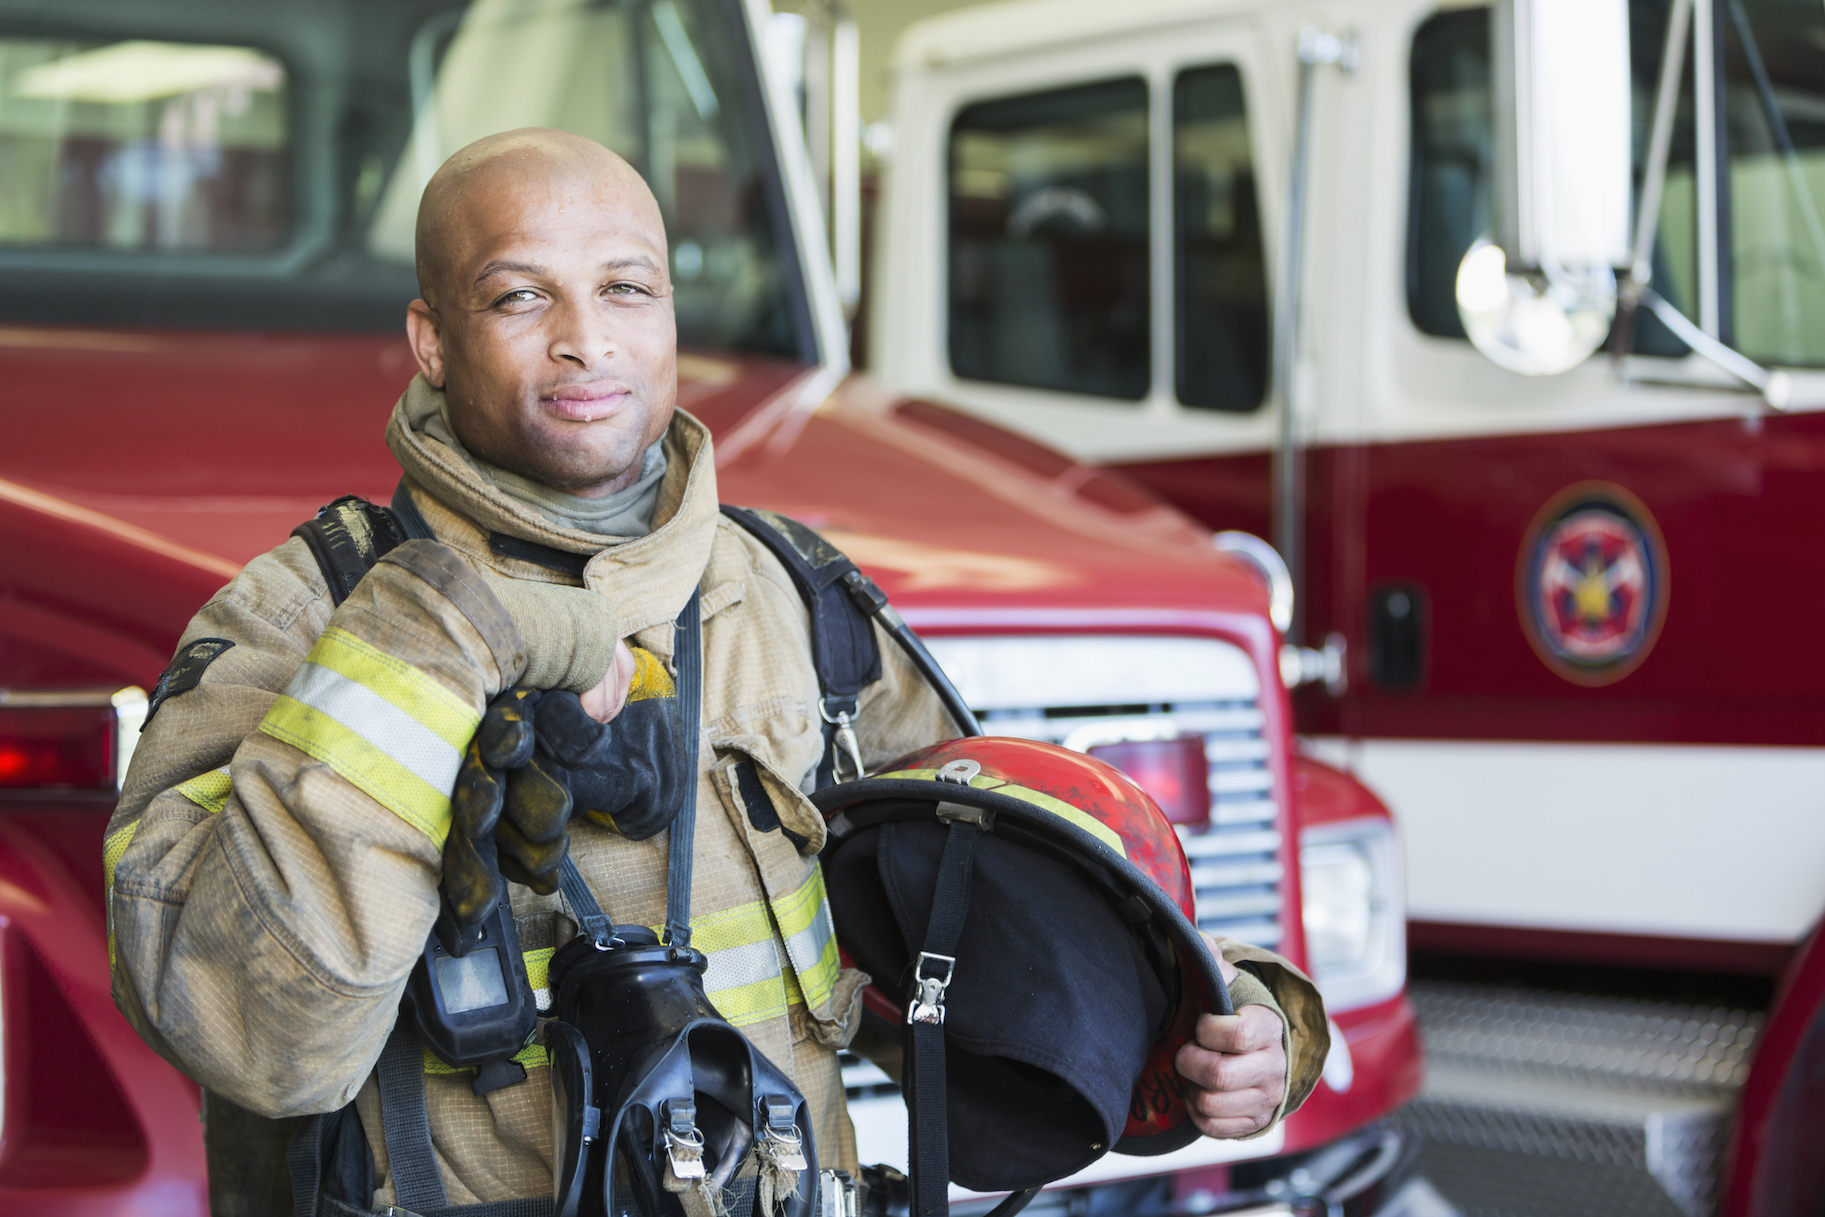 Fireman standing in front of fire truck looking into camera